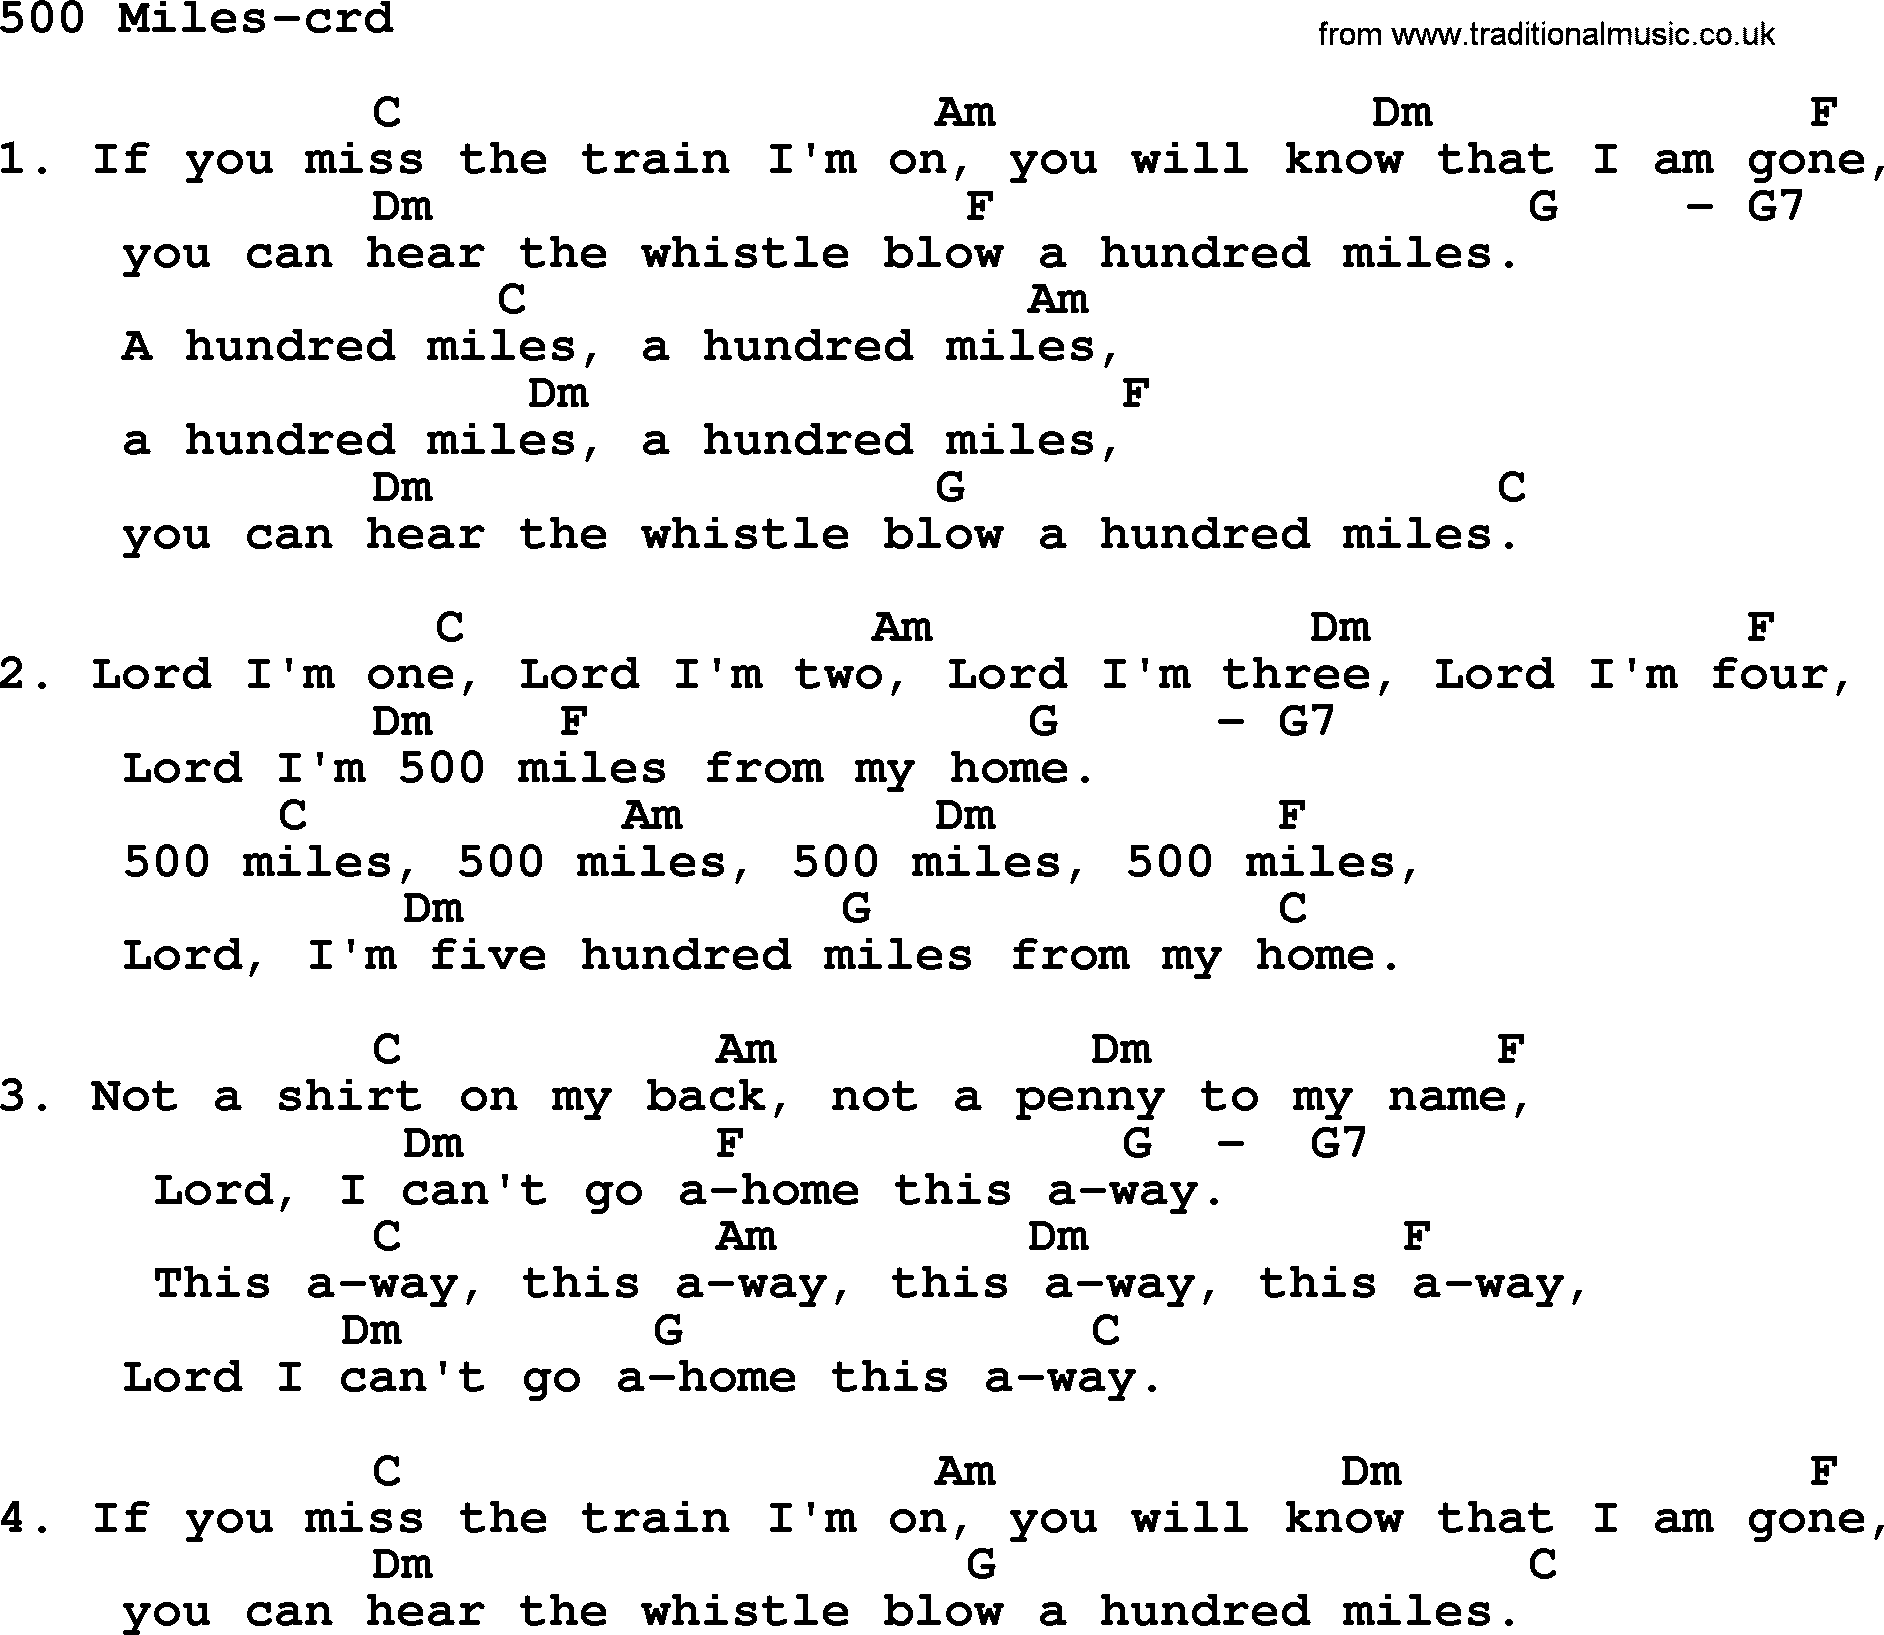 Kingston Trio Song 500 Miles Lyrics And Chords I'm trying how to play easy guitar on songs. traditional music library